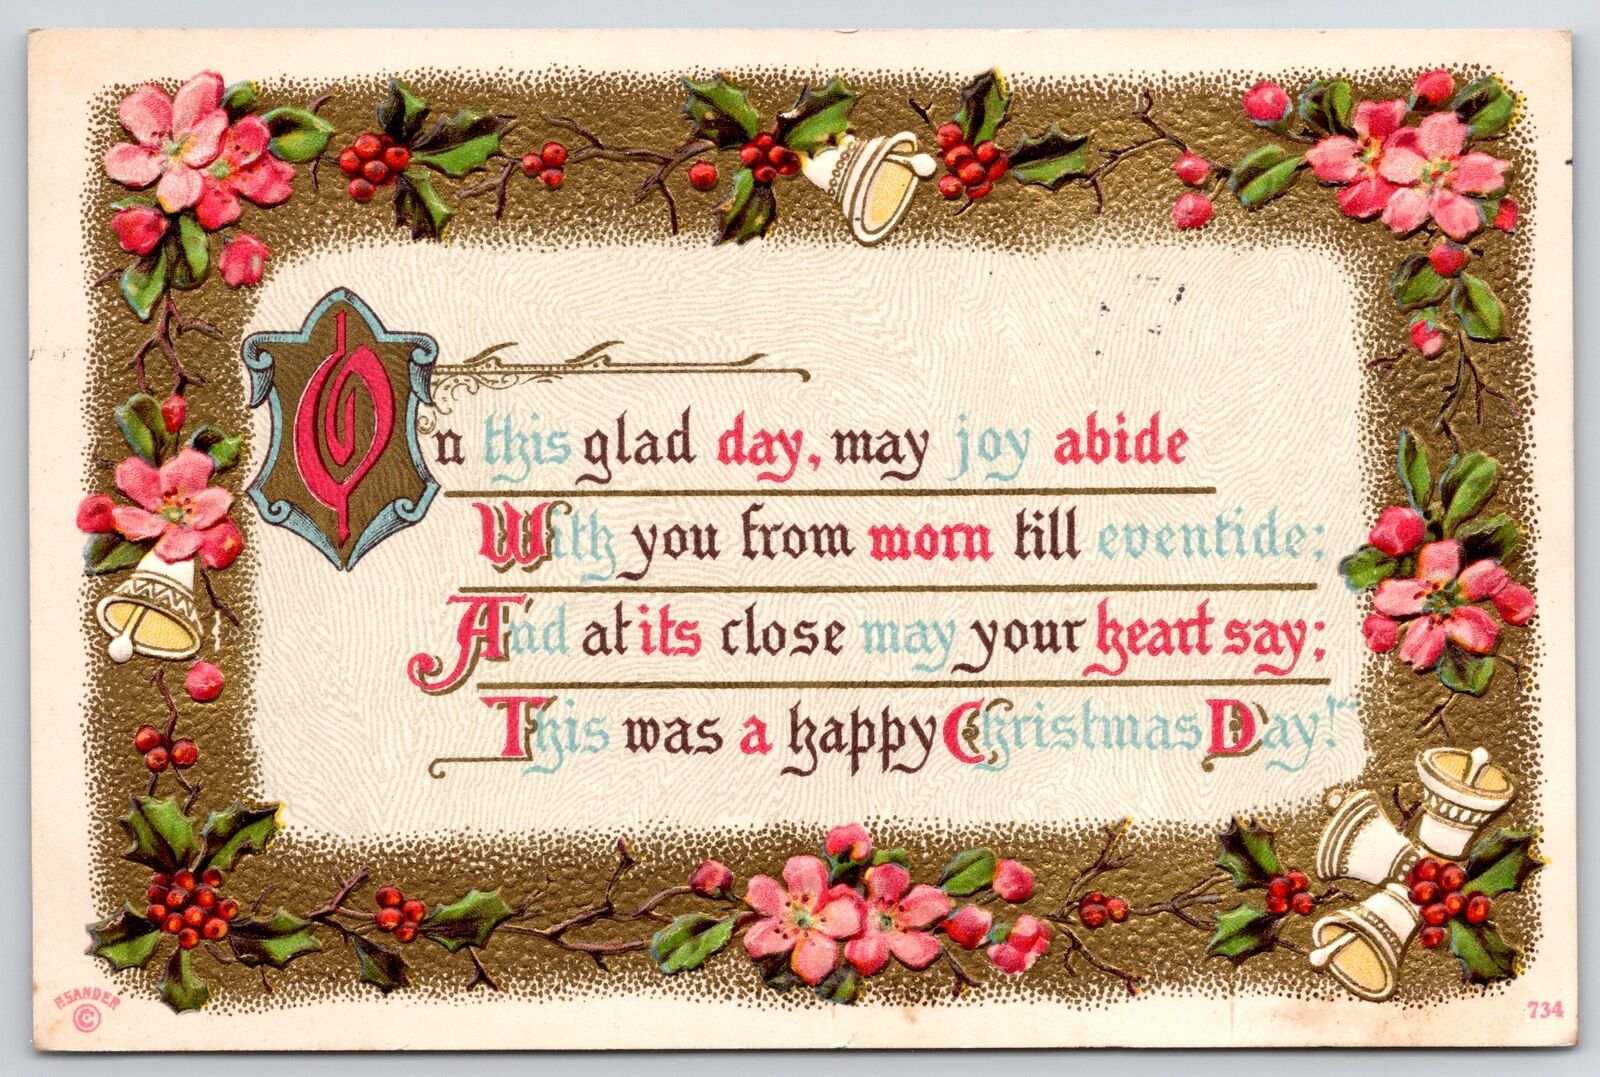 Christmas, Day Flower Framed Greetings Card 1914 Holiday, Vintage Postcard